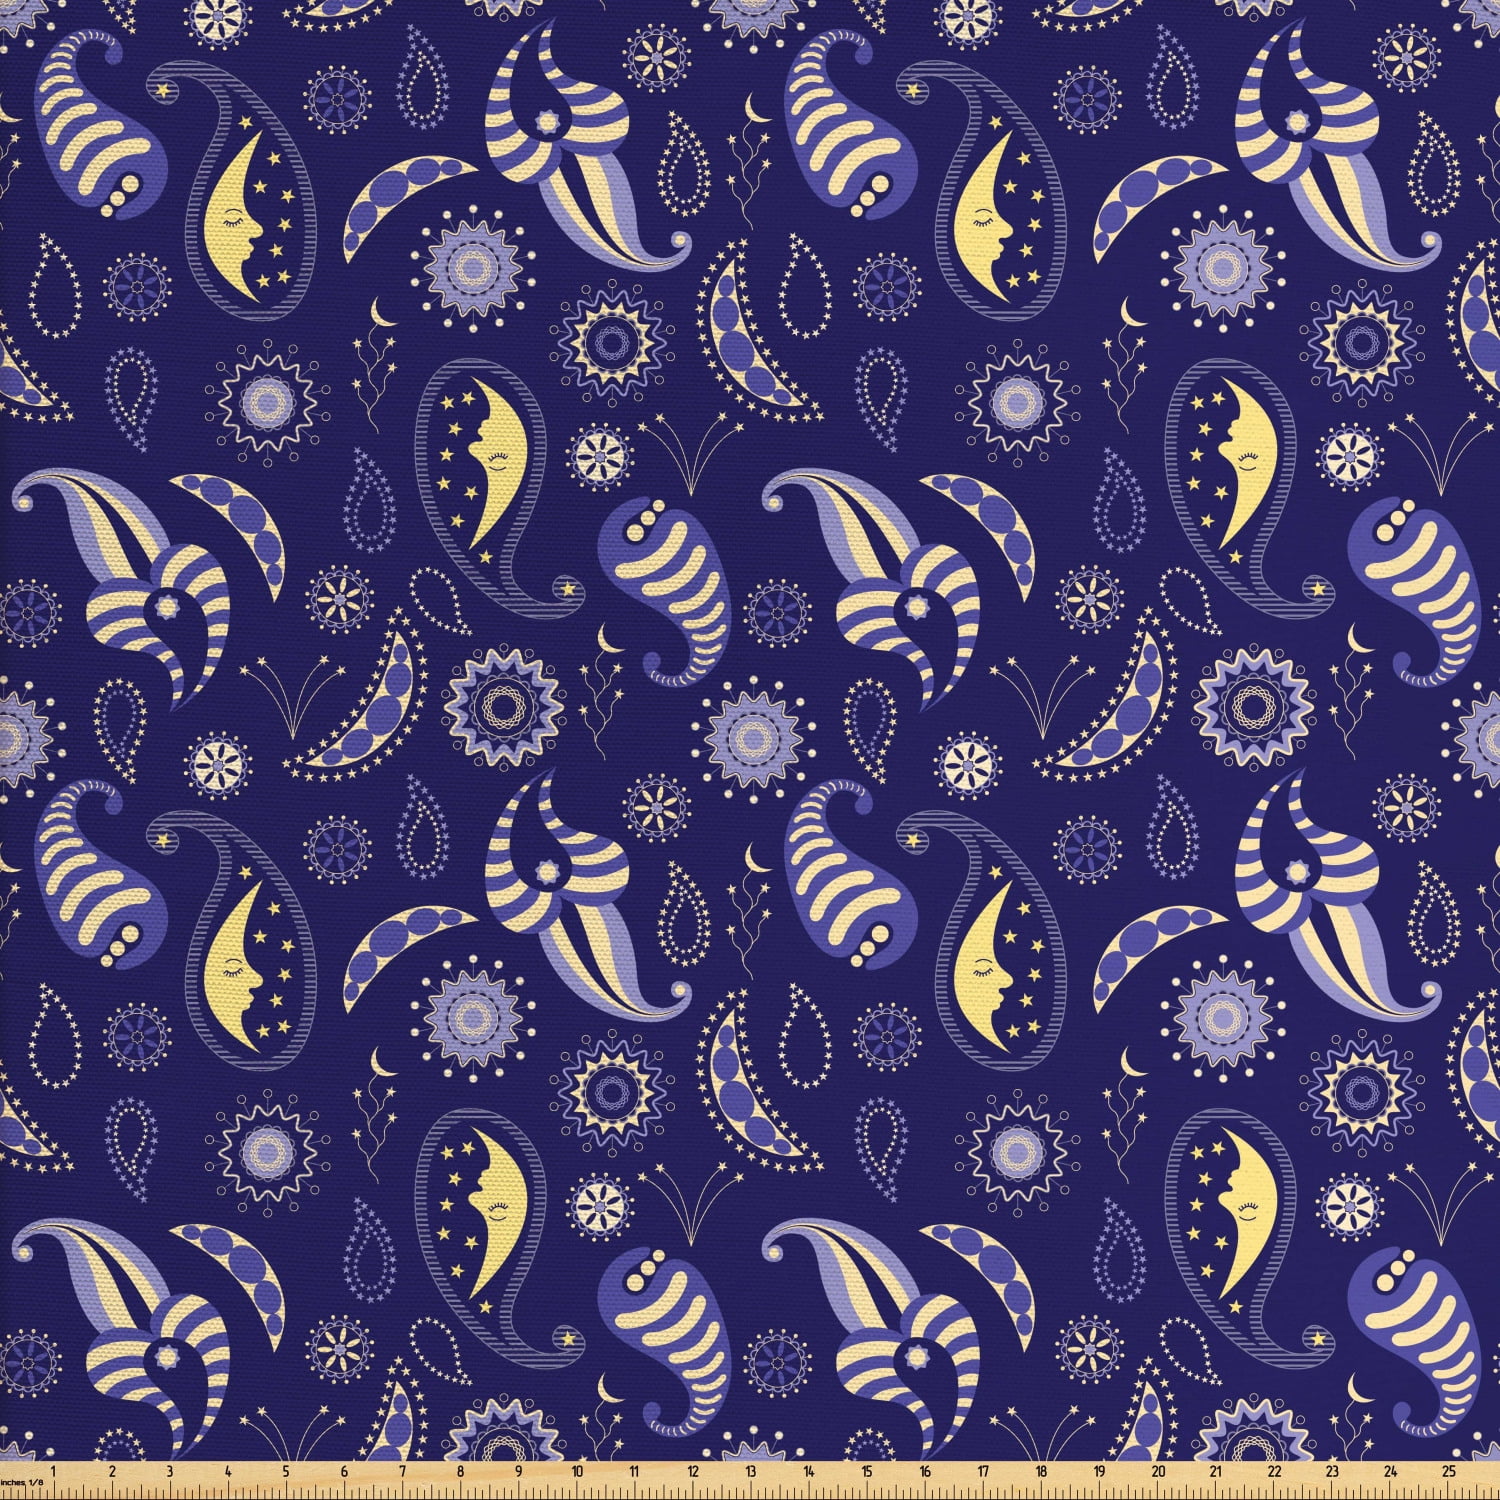 Moon Fabric by The Yard, Abstract Floral with Stars and Sleeping Moons ...